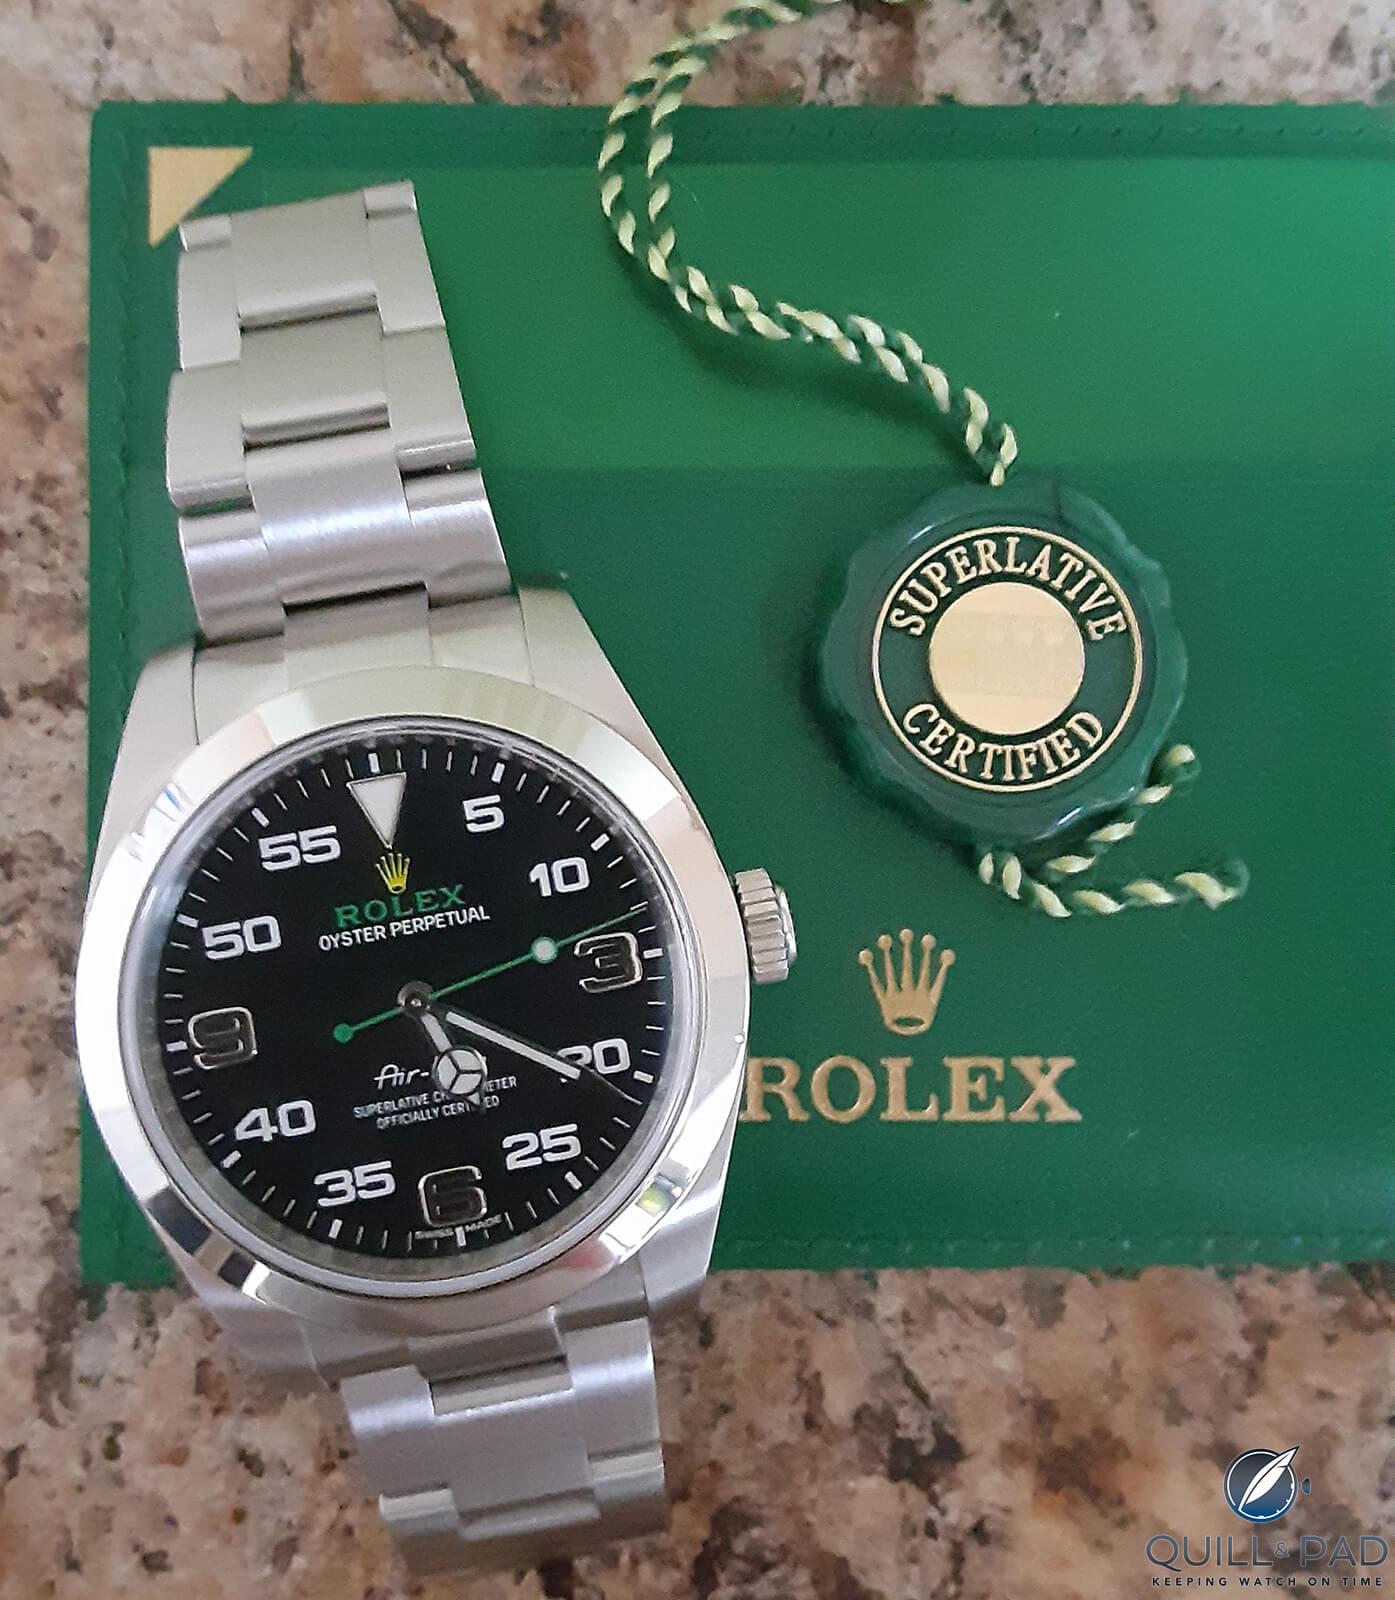 Why I Bought Rolex “Bloodhound” Ref. 116900 Quill & Pad